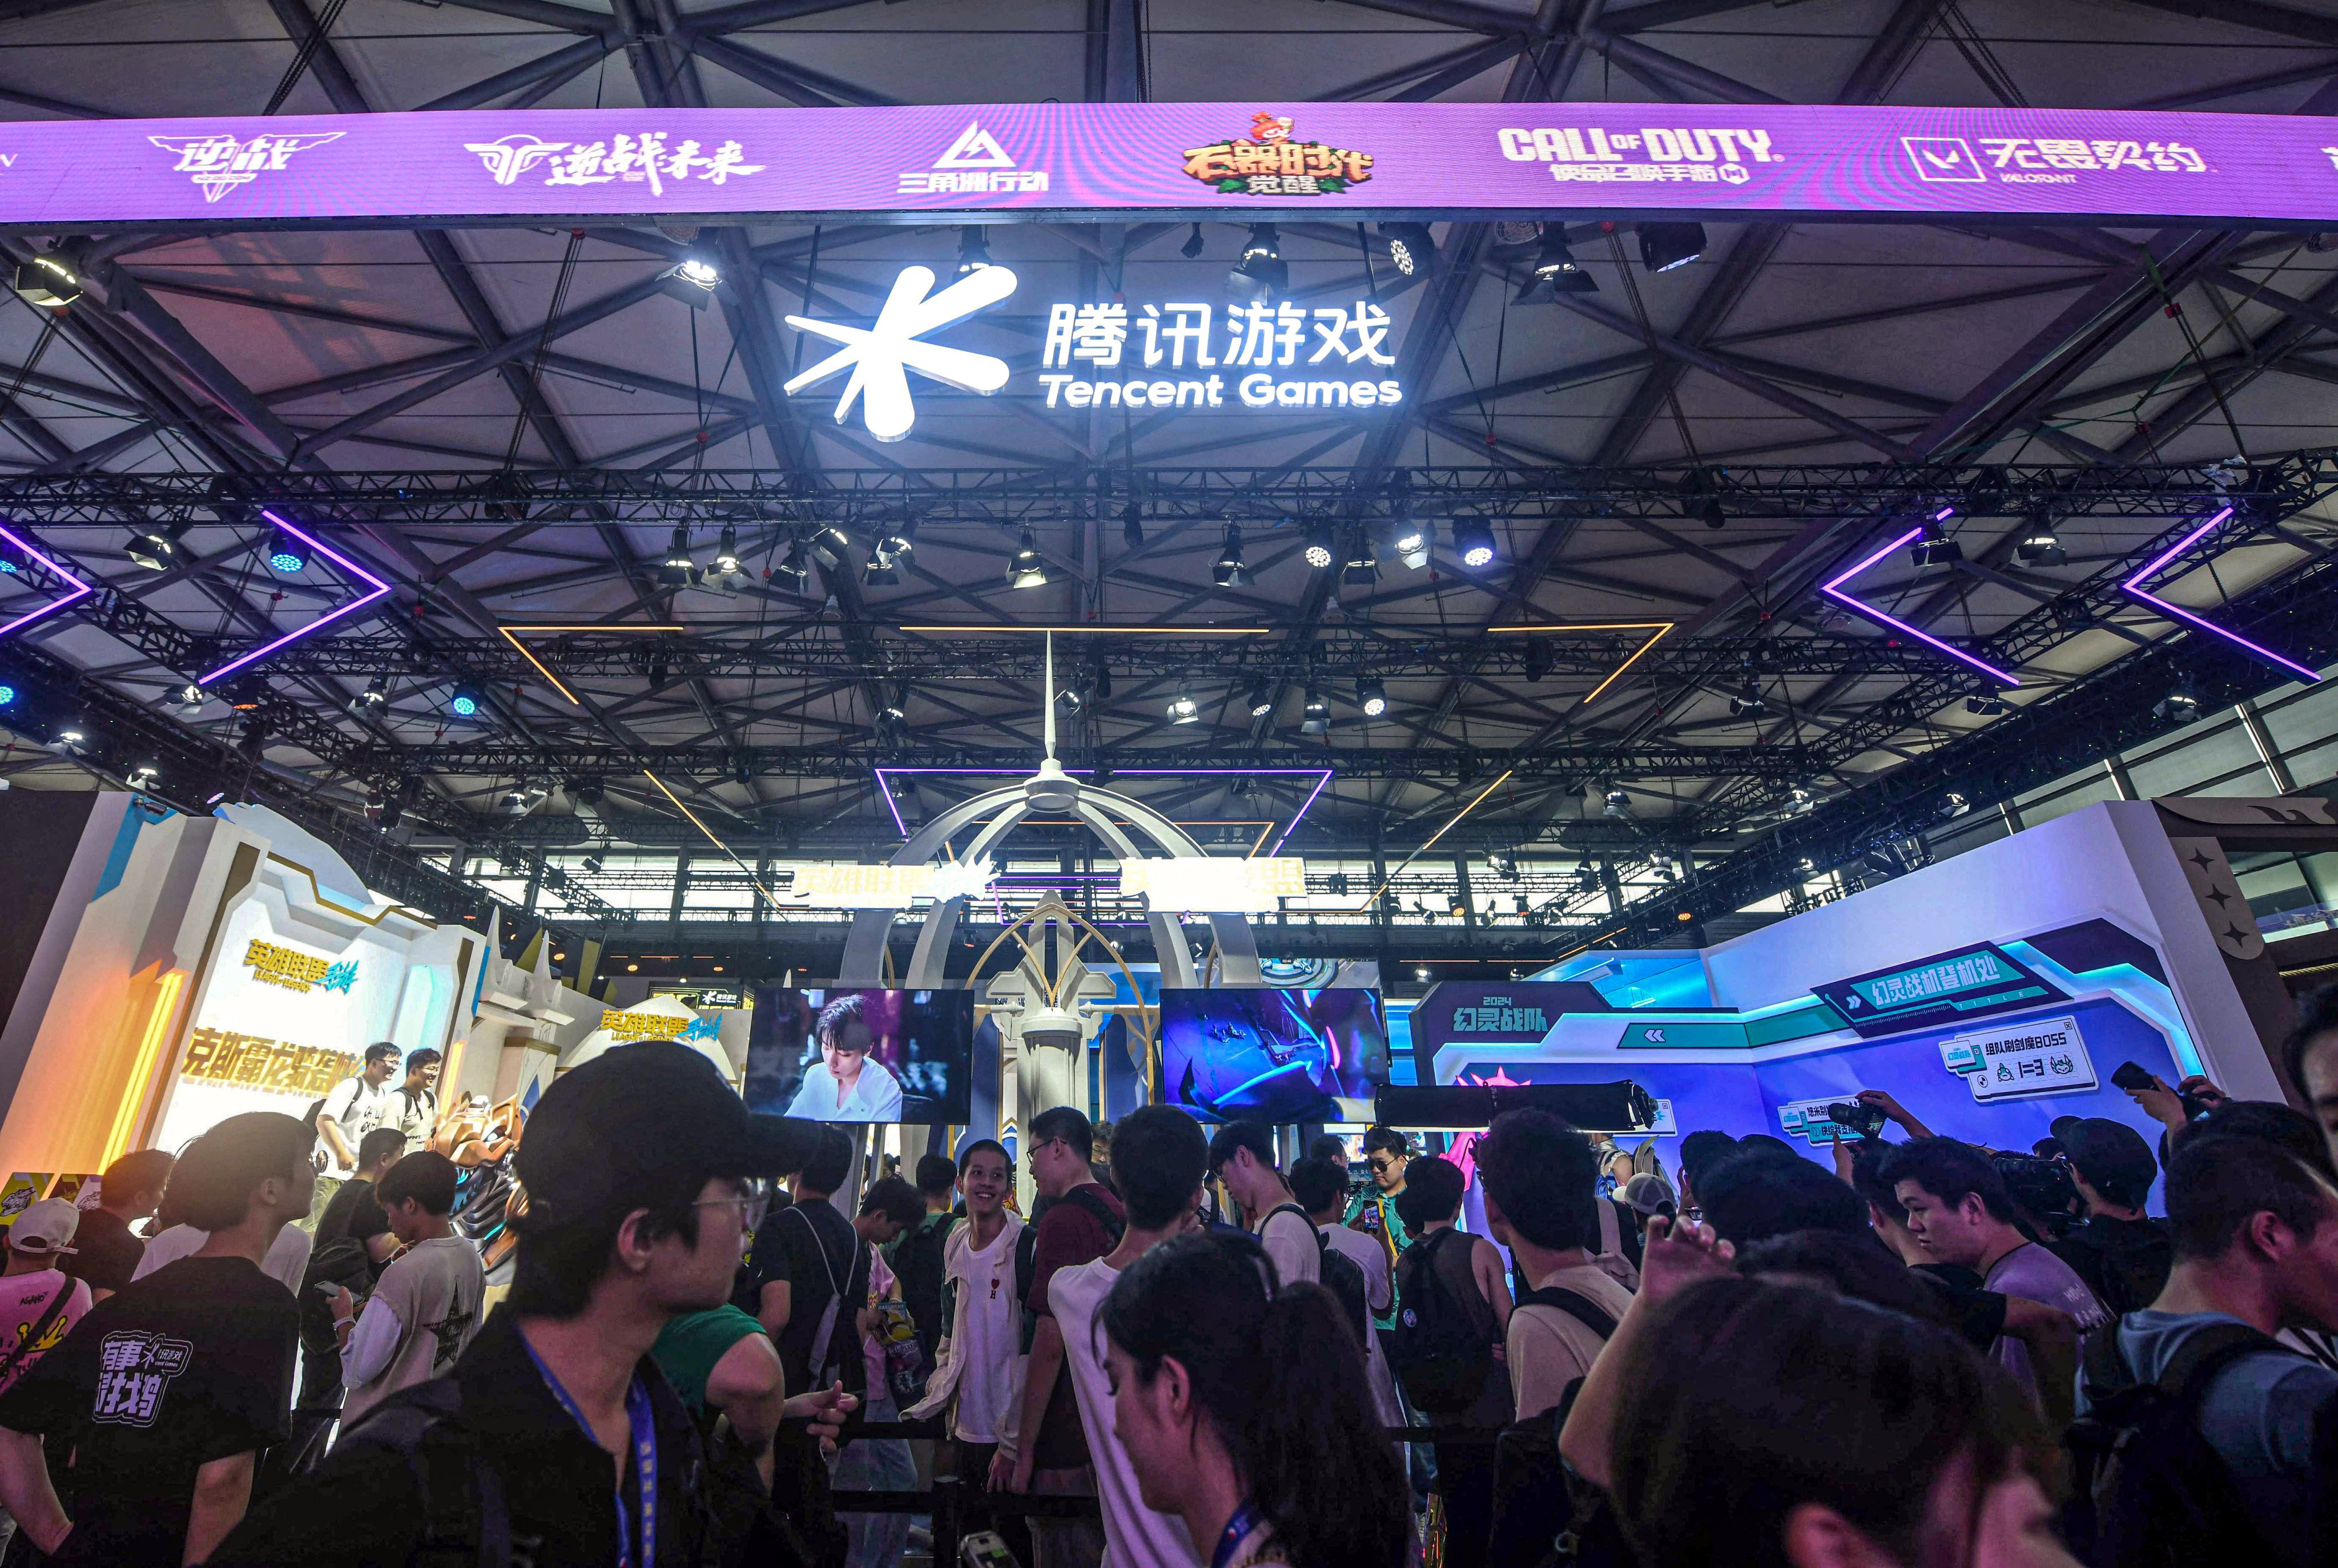 scmp.com - Ann Cao - Tencent, Microsoft, Amazon pitch AI tools for video game developers at ChinaJoy